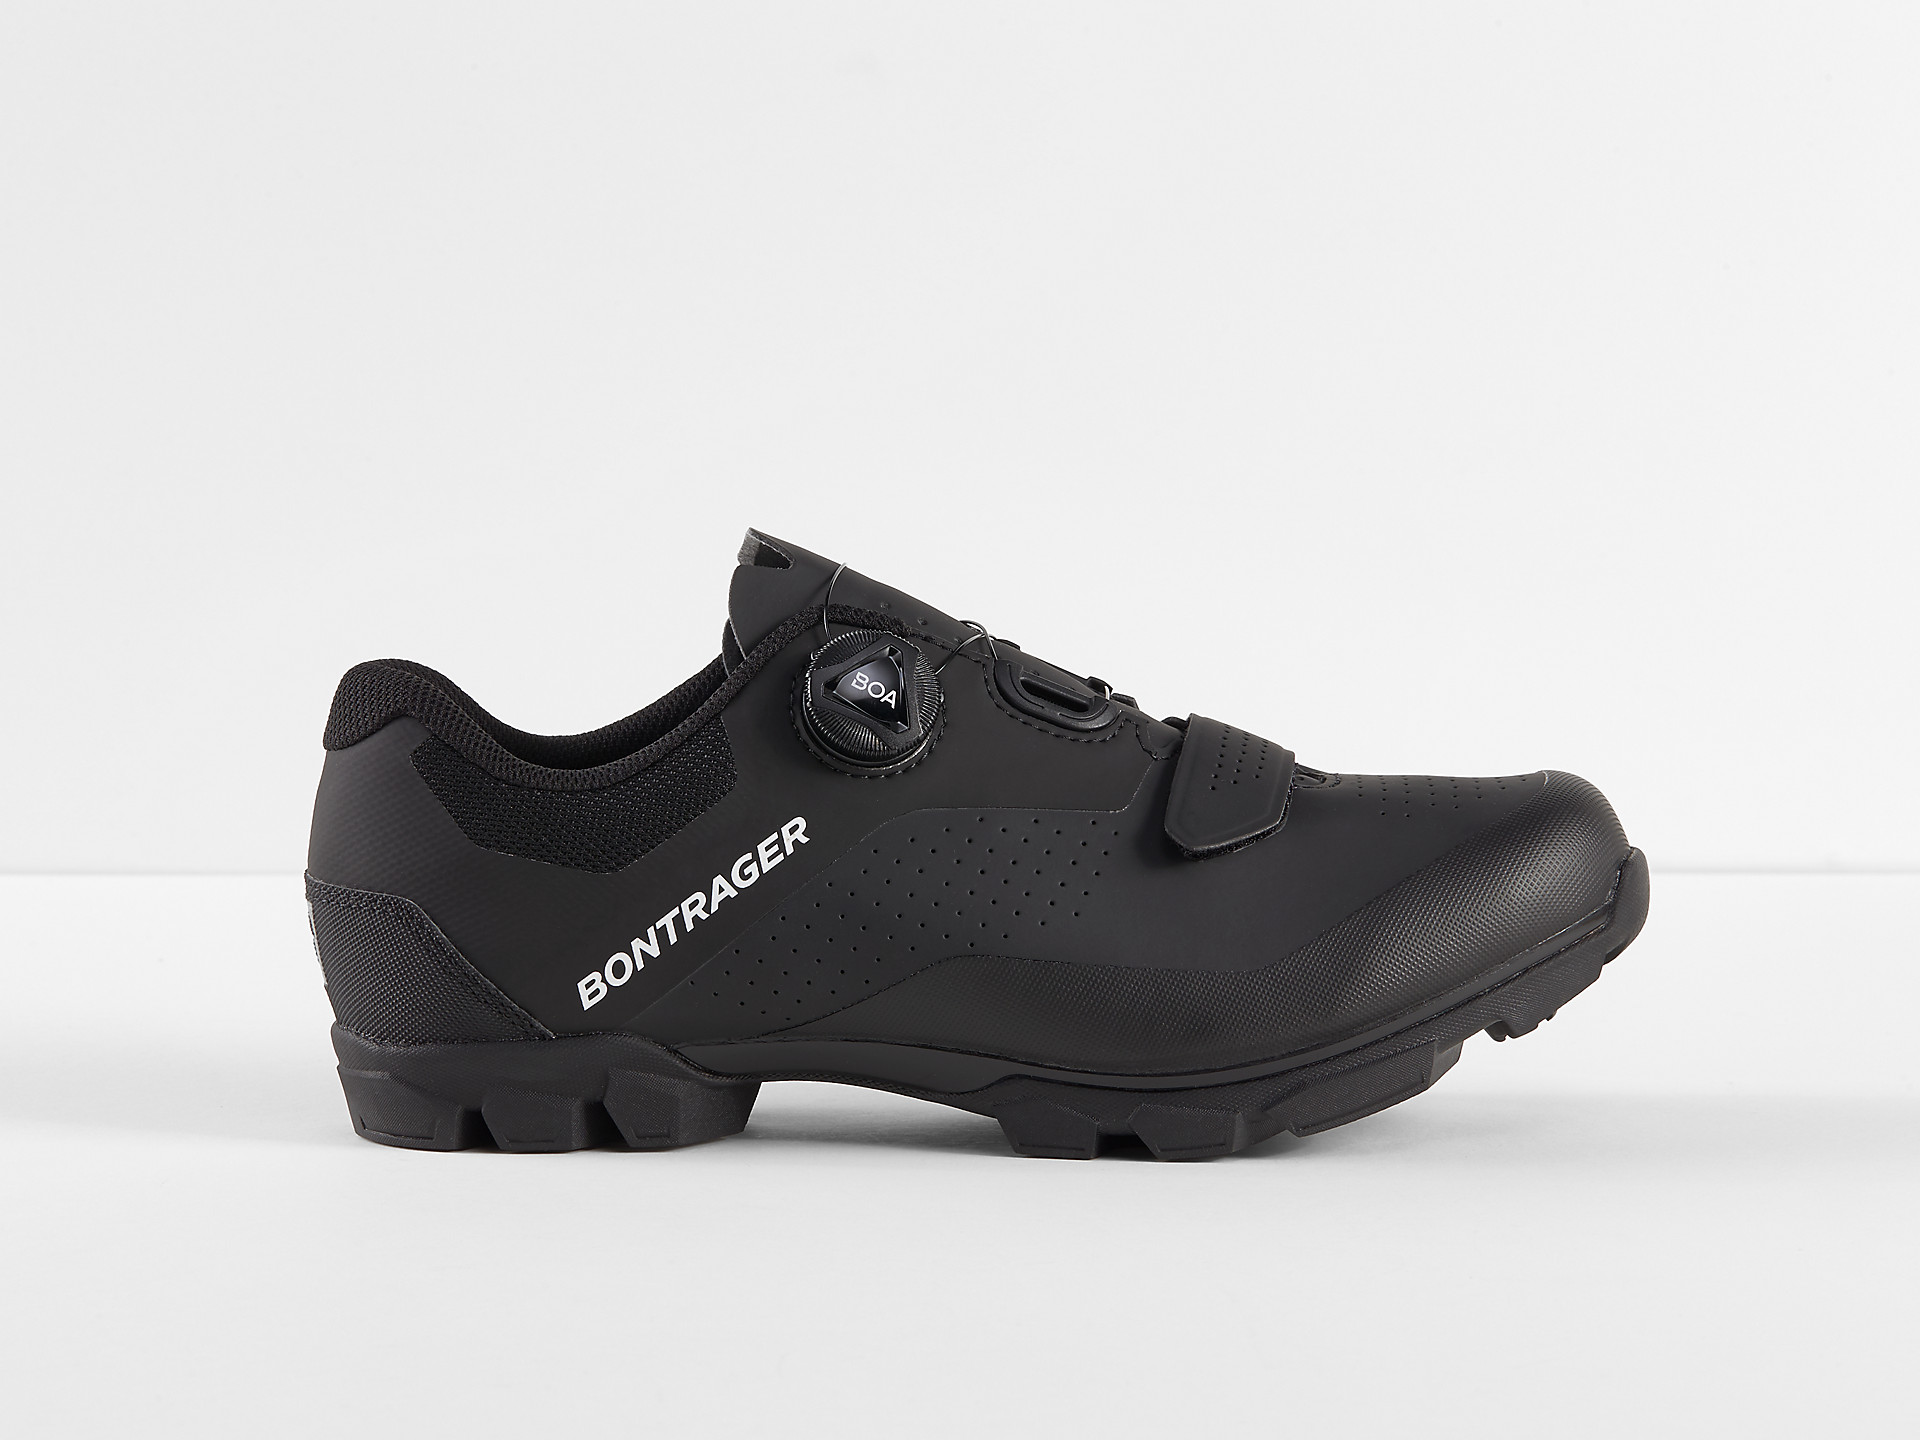 <a href="https://cycles-clement.be/product/bont-chaussures-foray-vtt-48-black/">BONT CHAUSSURES FORAY VTT 48 BLACK</a>